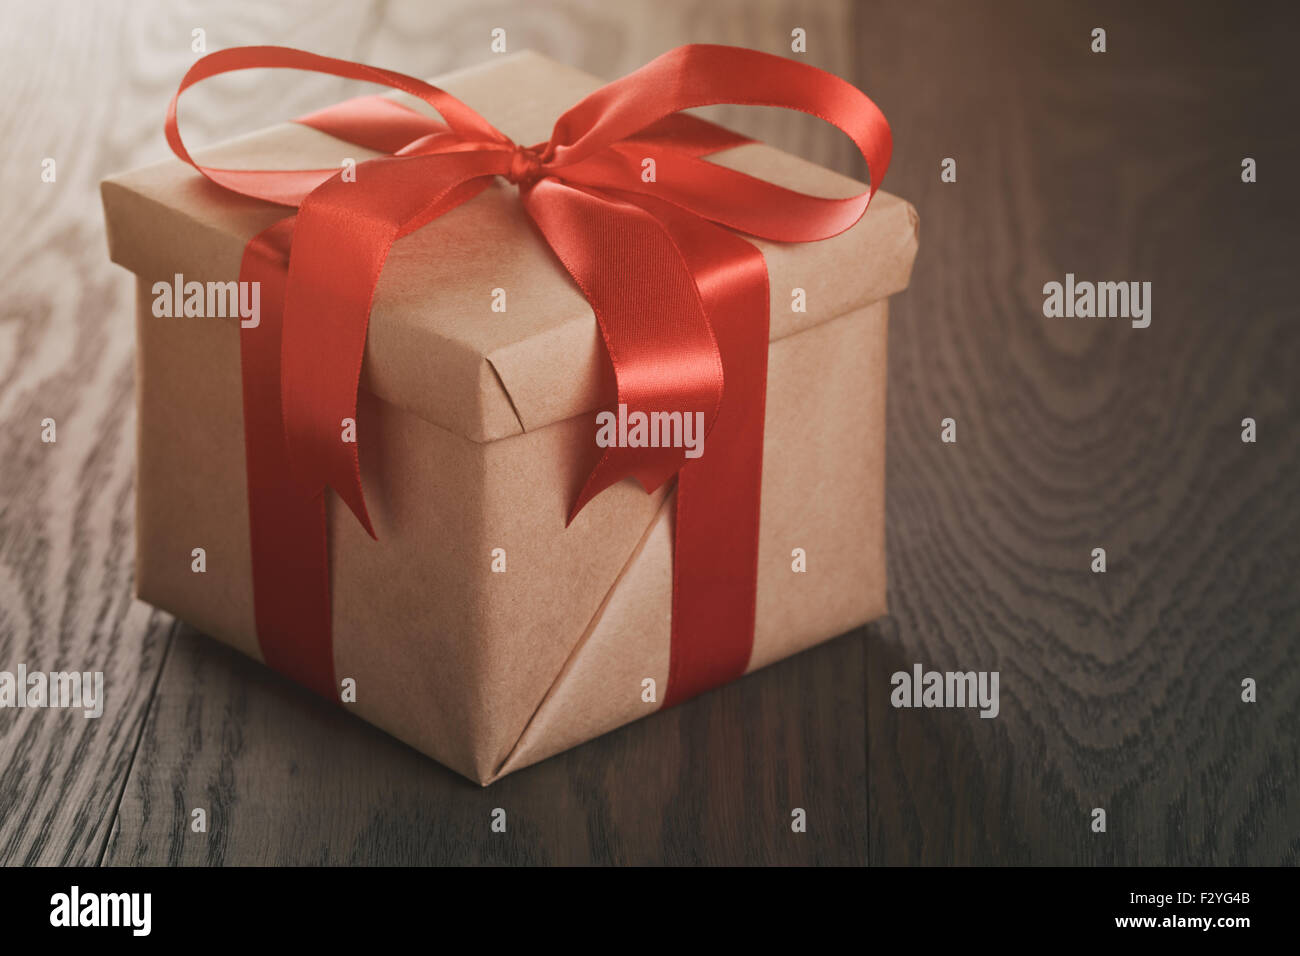 rustic gift box with red ribbon bow Stock Photo